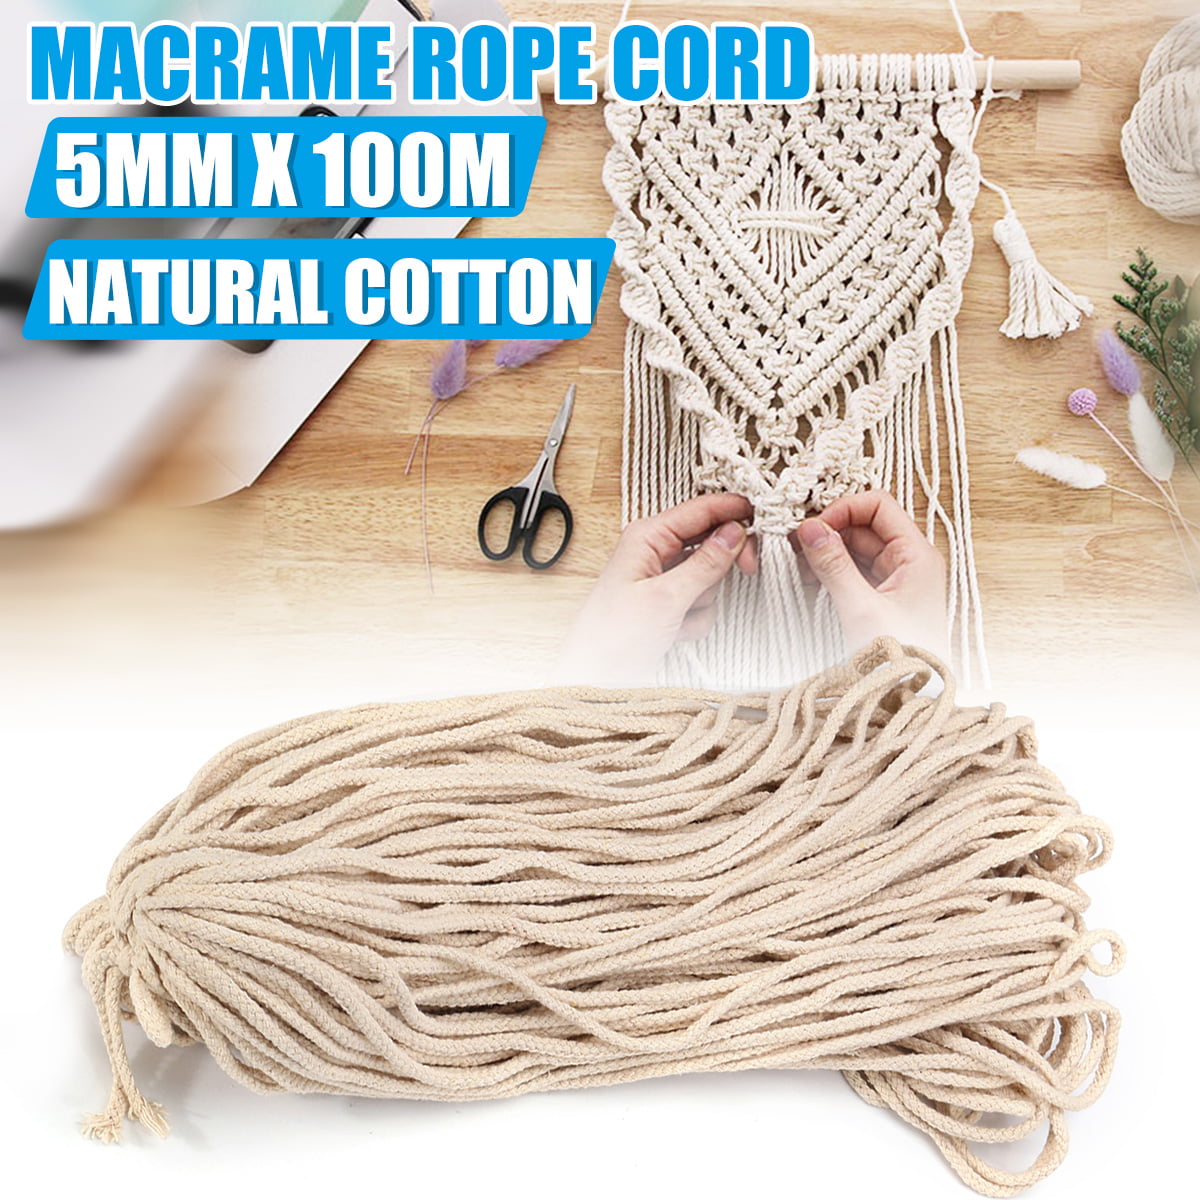 OKBOP Macrame Cord 100 Yard DIY Craft Supplies Natural Cotton Rope with 3 Strand Twisted Macrame Ropes for Handmade Plant Hanger Wall Hanging Making 3mm x 100 Yard, Beige 